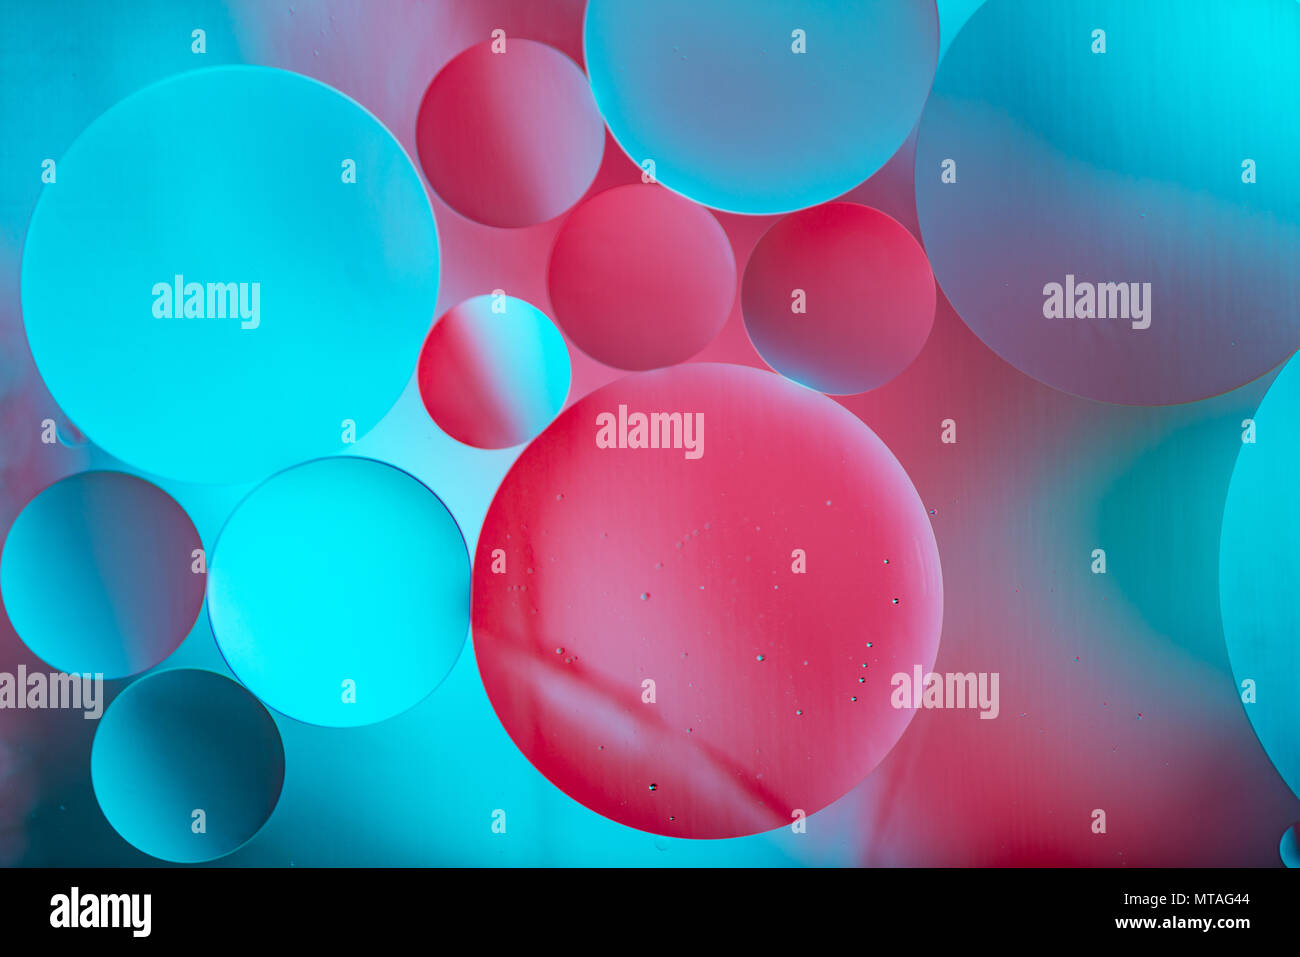 Oil droplets in water refract a blue and pink background. Stock Photo